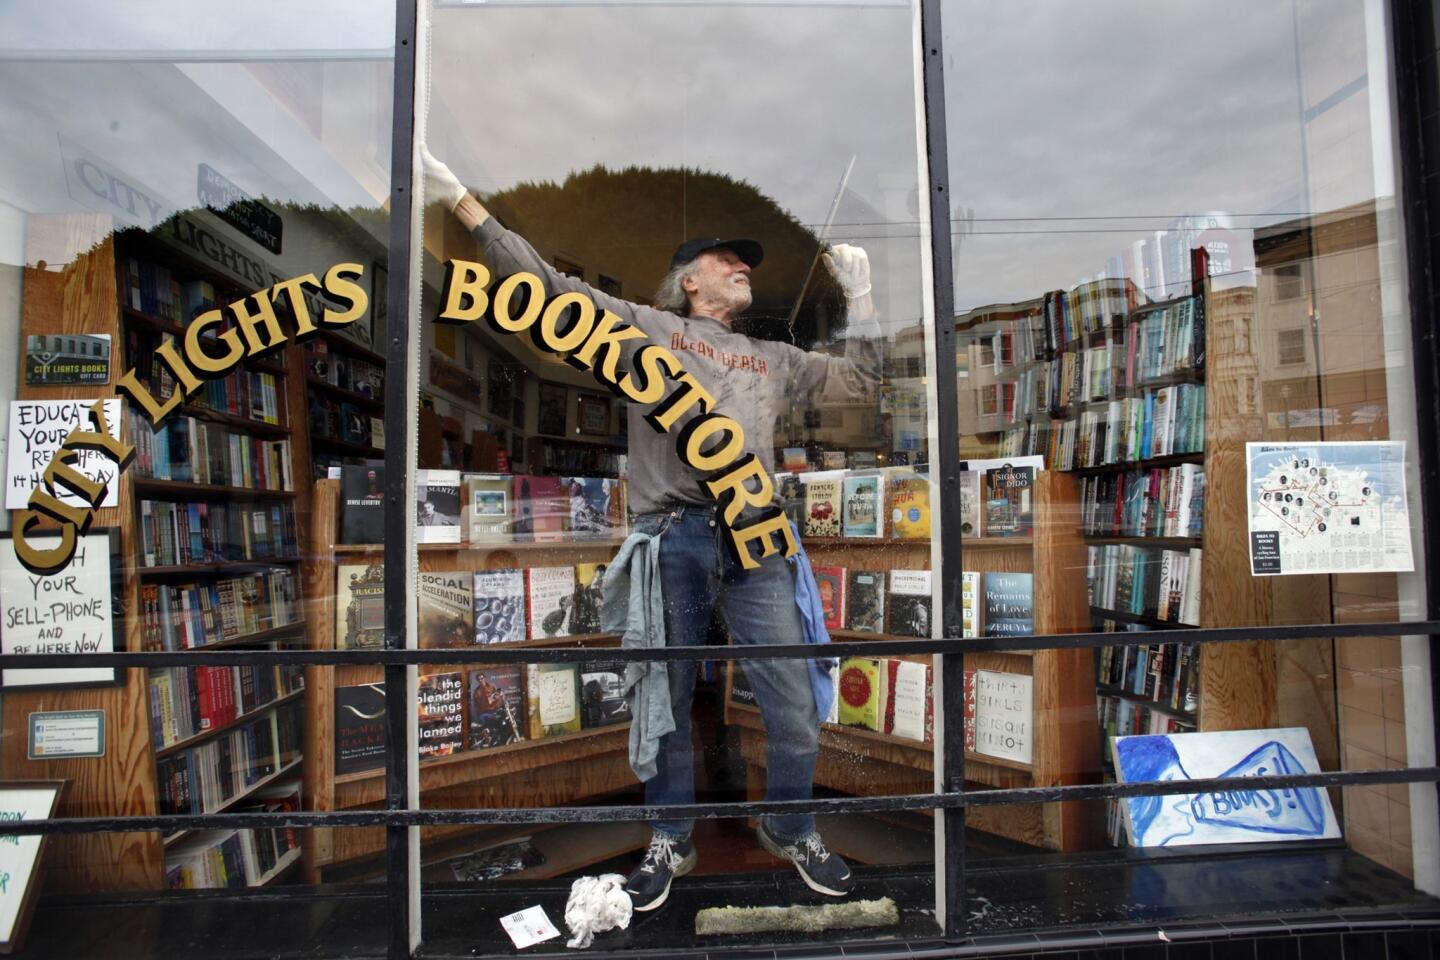 Hanging on to the window sill, Peter Munk does a delicate ballet while washing windows at City Lights. Munk, who has been washing the bookstore's windows since 1974, does a thorough washing once a month and takes extra time to clean the mosaic design at the front door entryway.